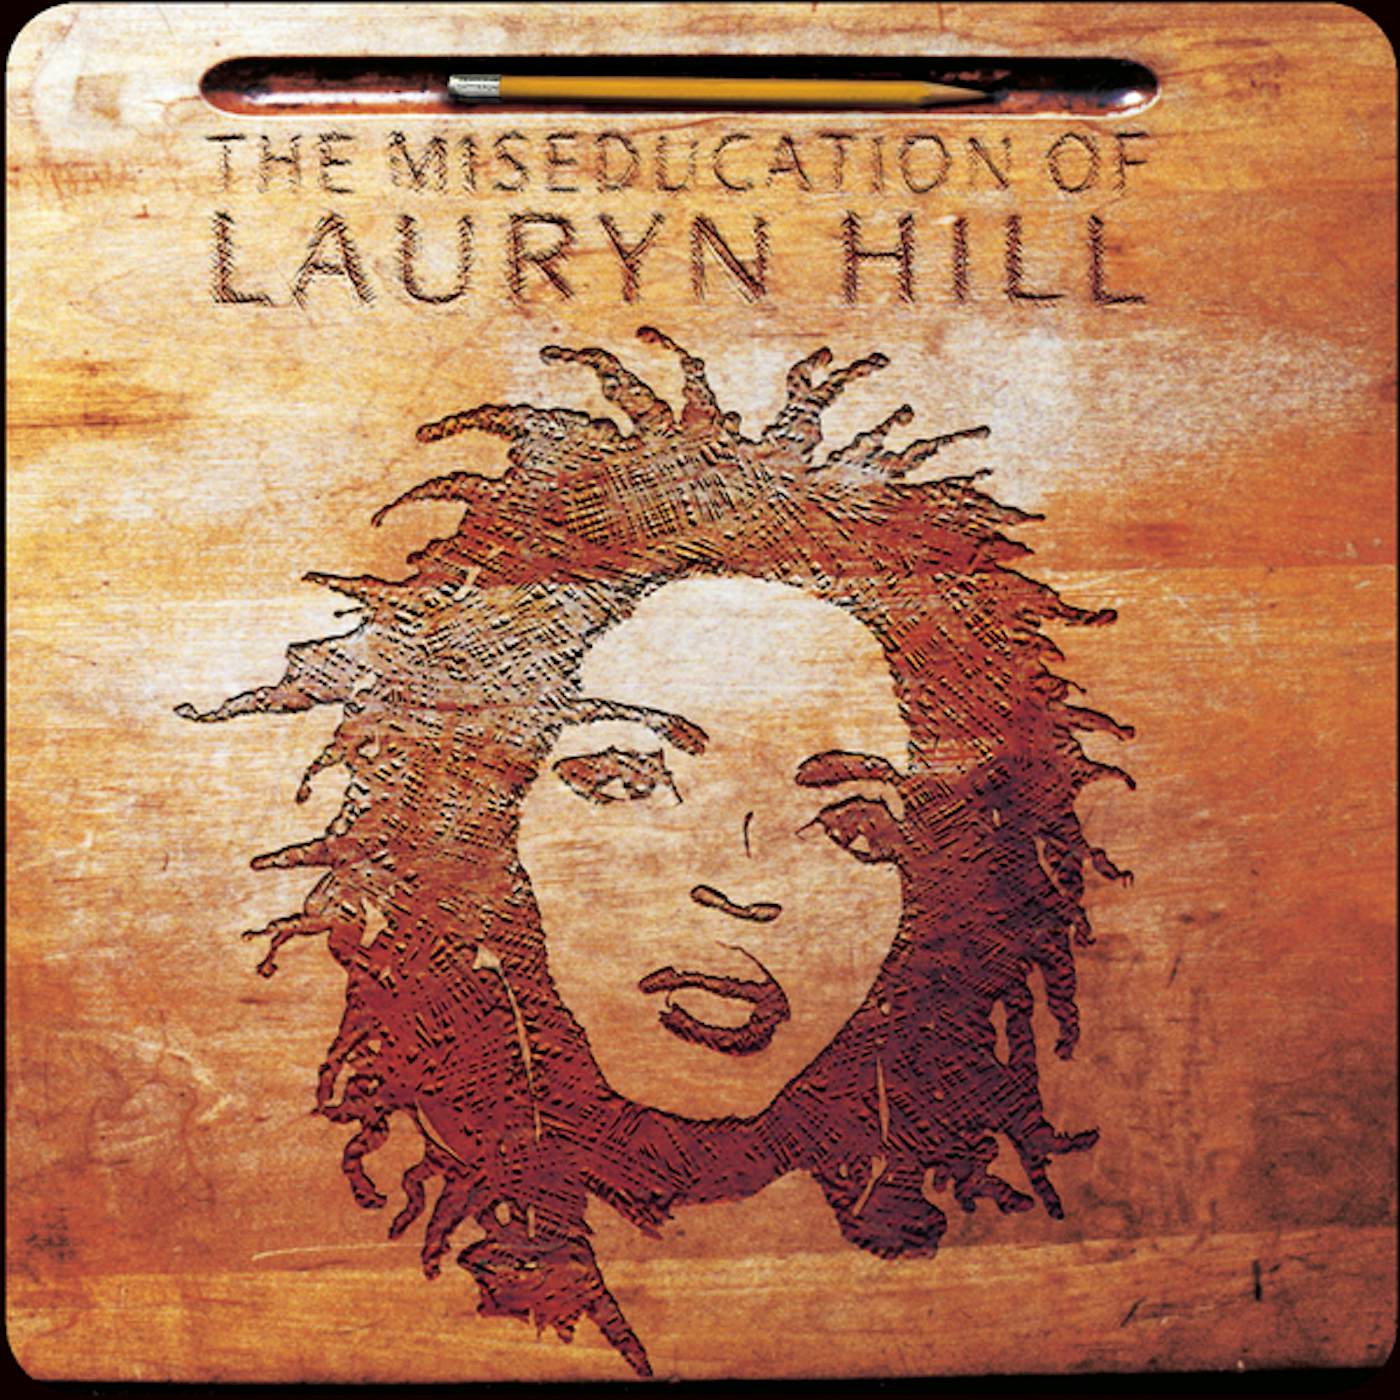 The Miseducation of Lauryn Hill CD